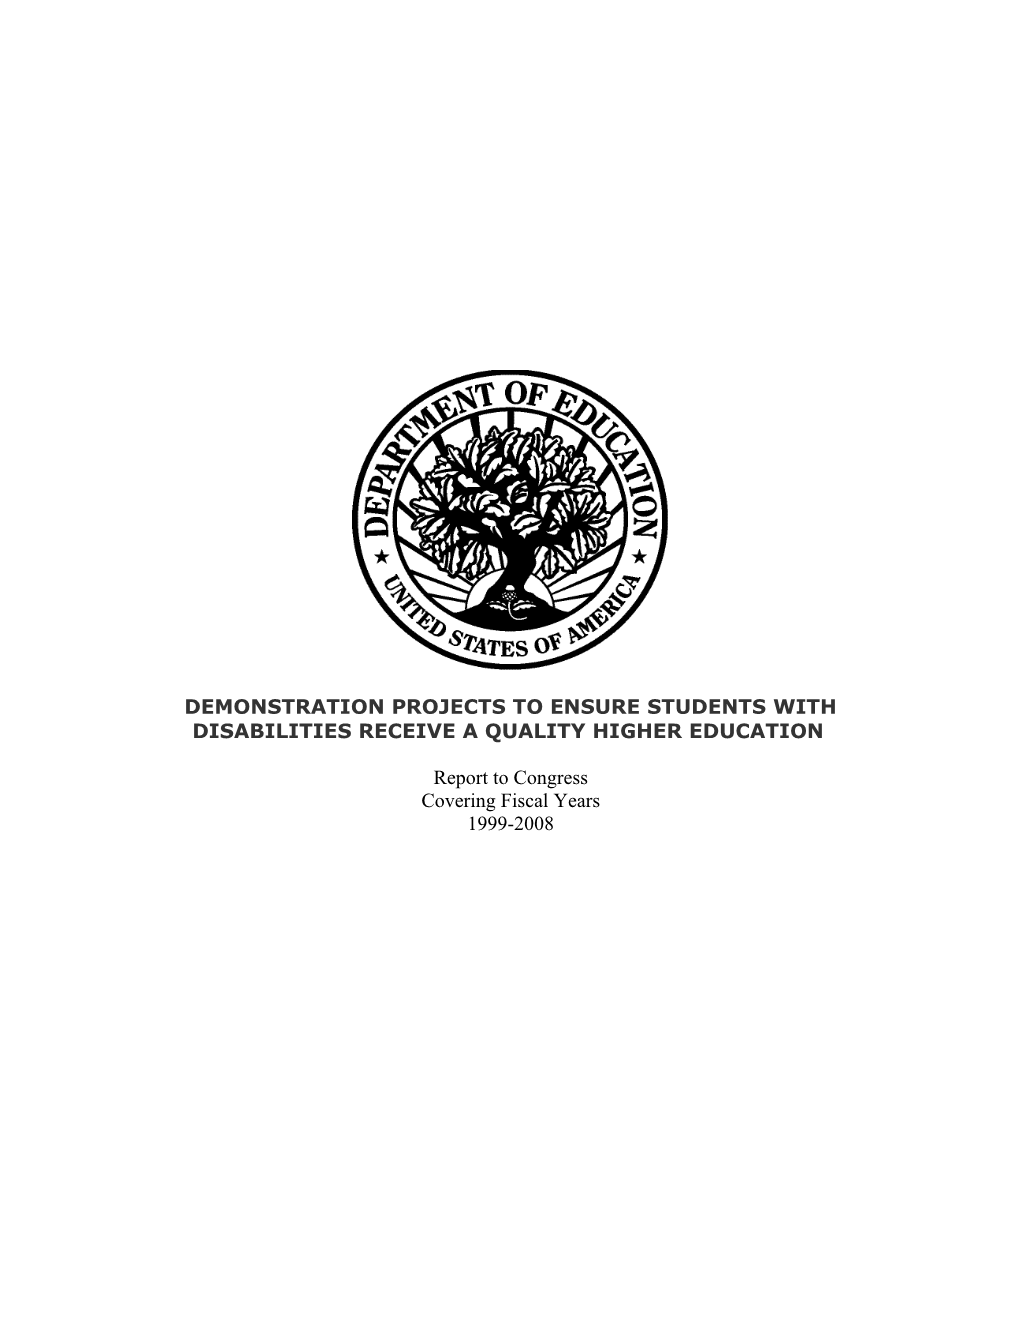 Report to Congress Covering Fiscal Years 1999-2008 for the Demonstration Projects to Ensure